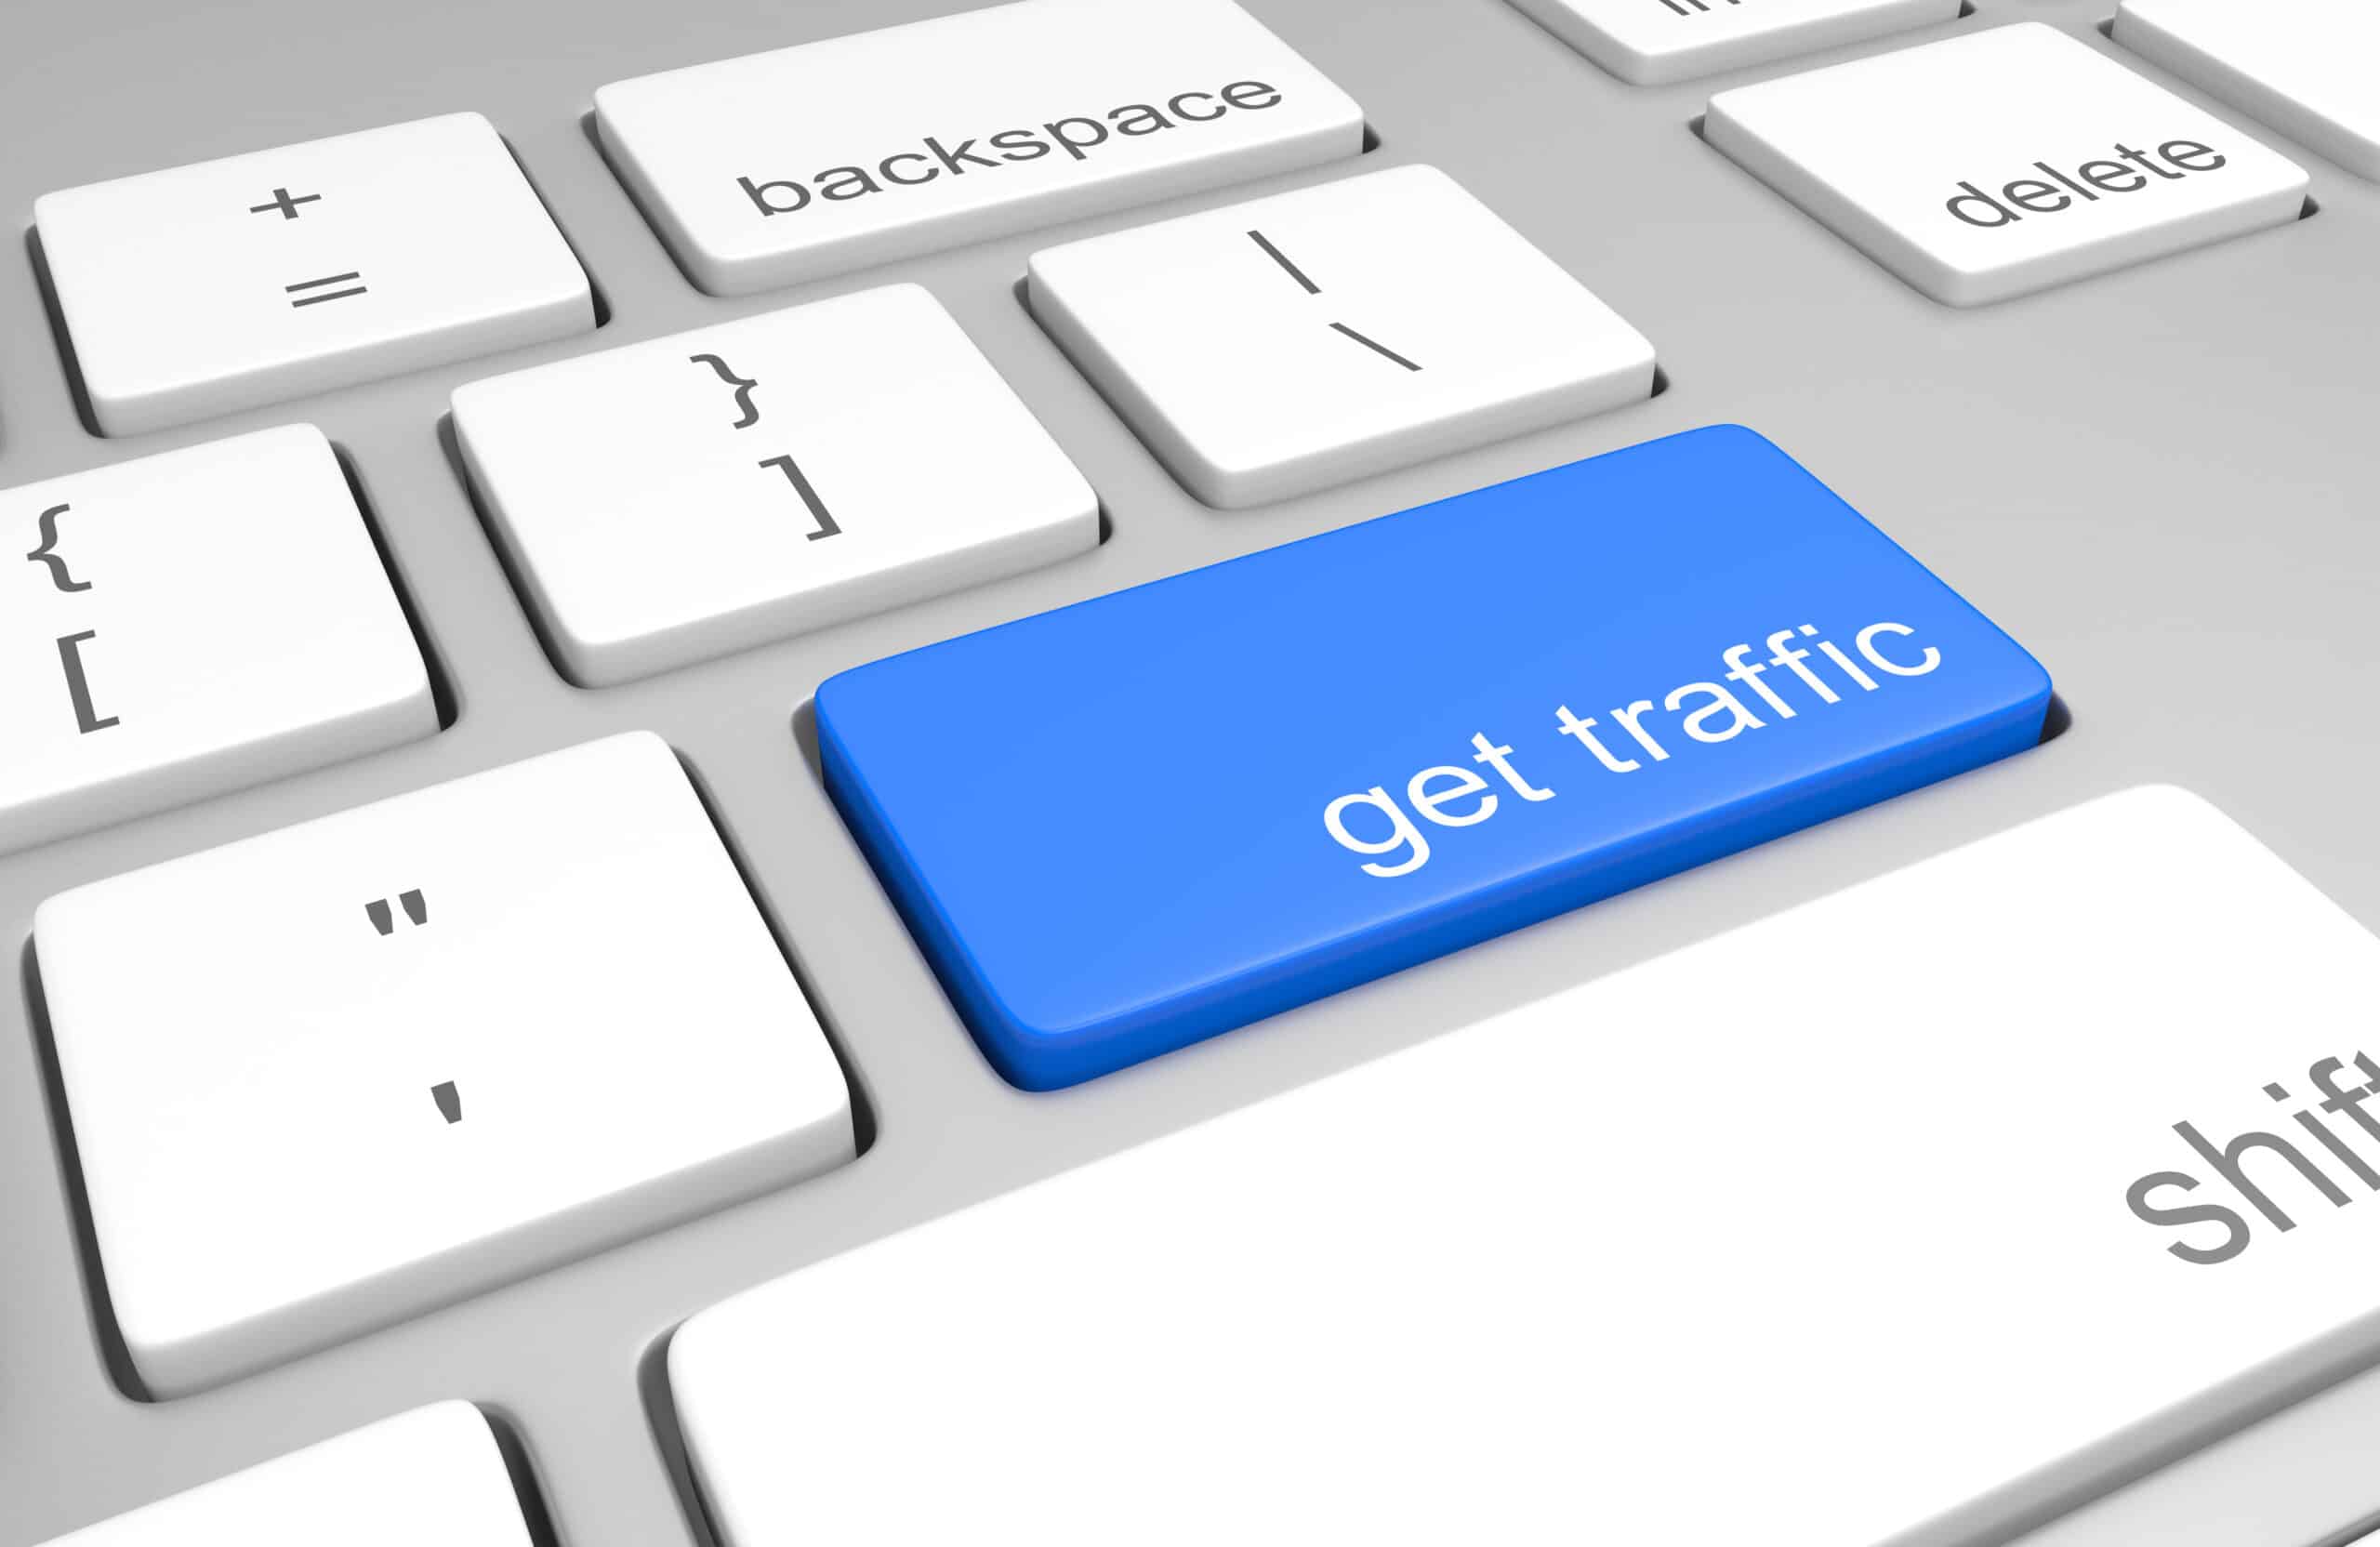 What is organic traffic?

Get traffic button on keyboard.